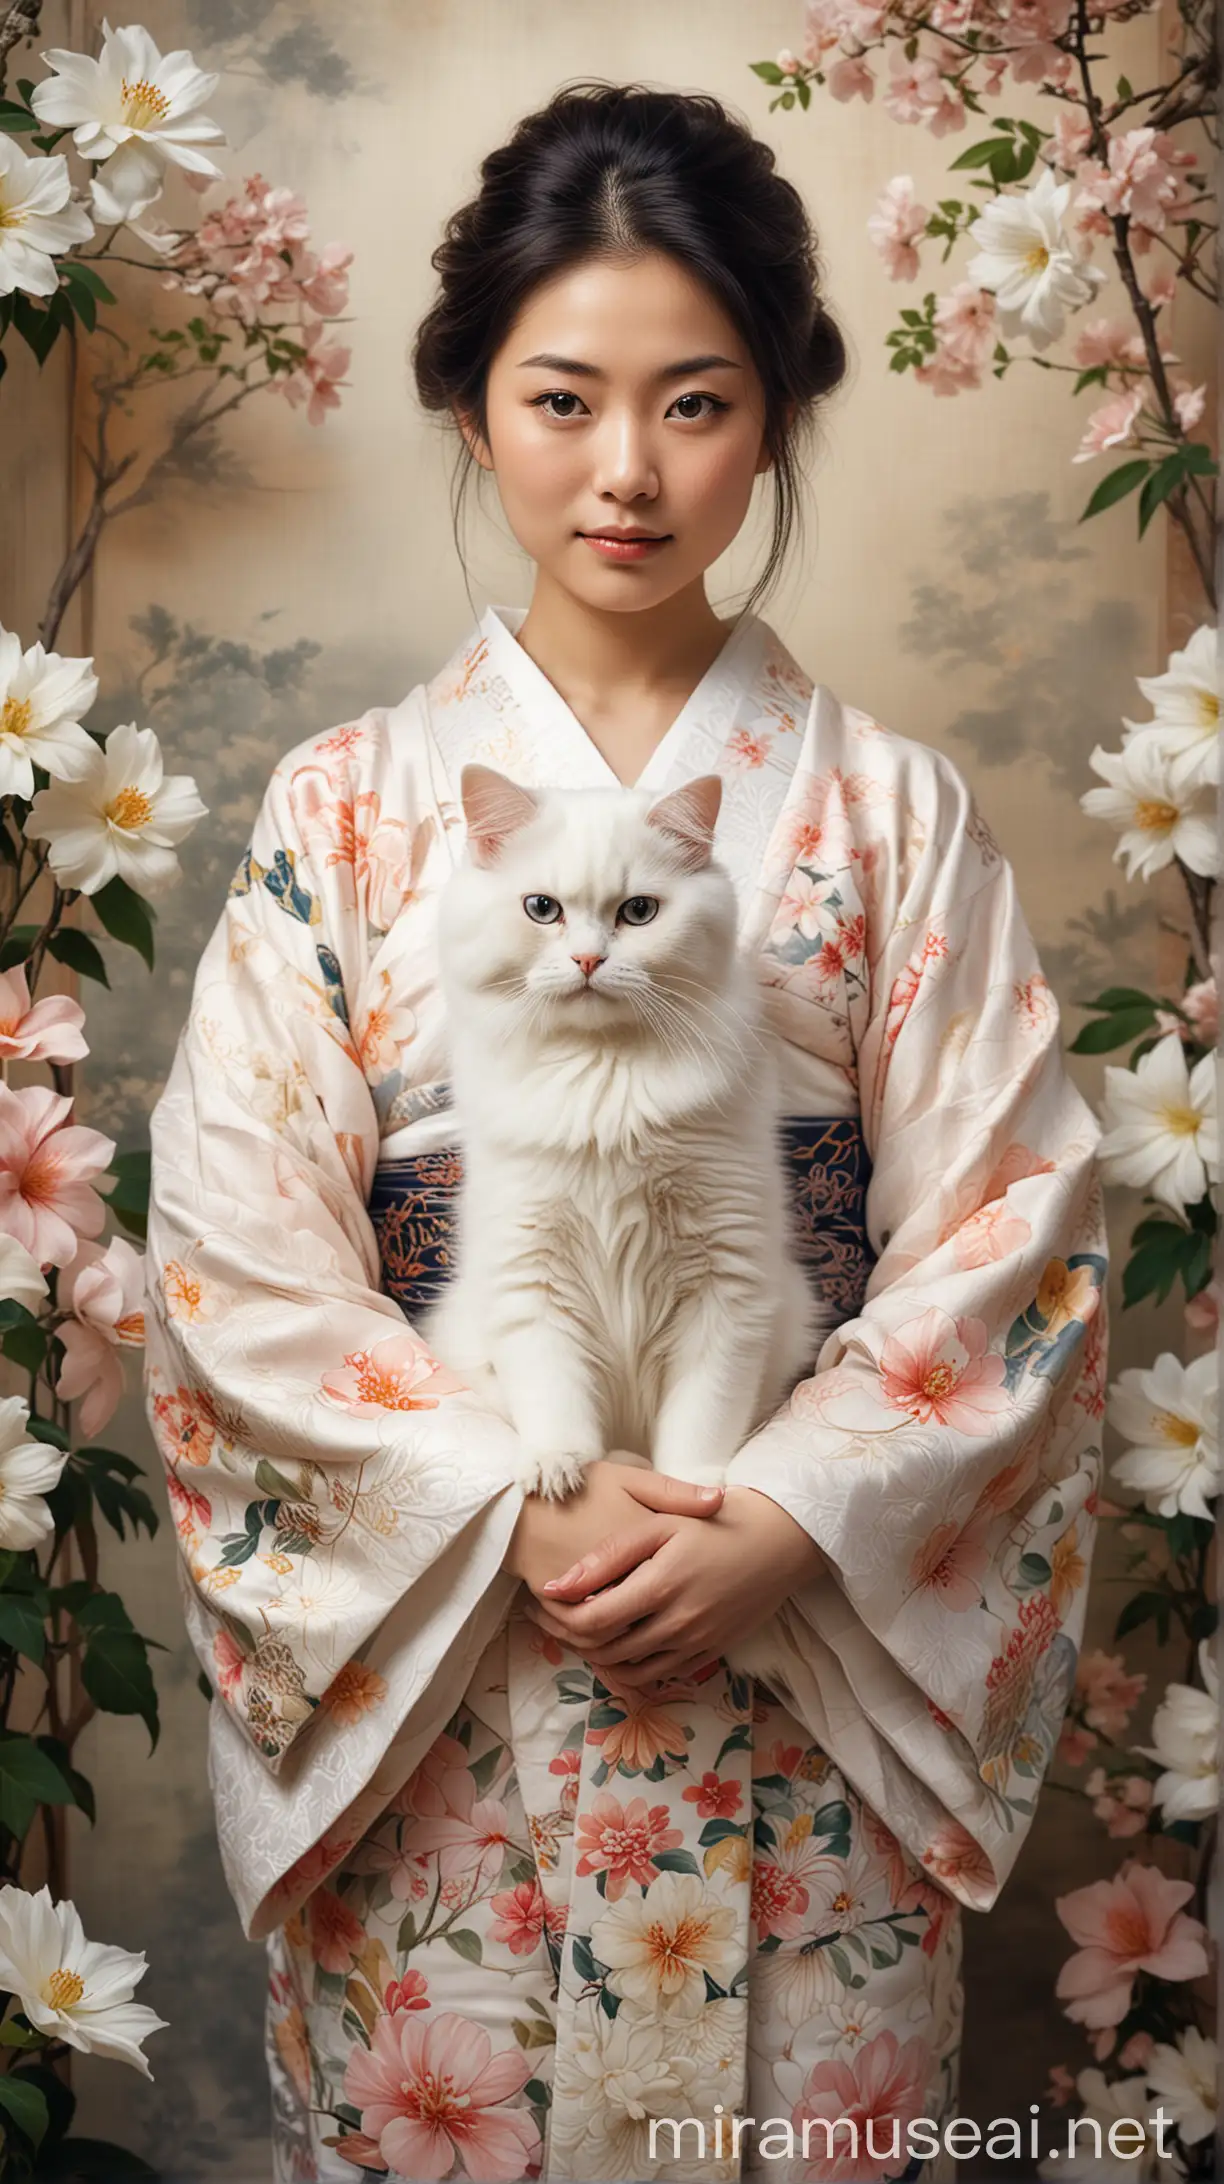 Tranquil Japanese Woman in Kimono with White Persian Cat